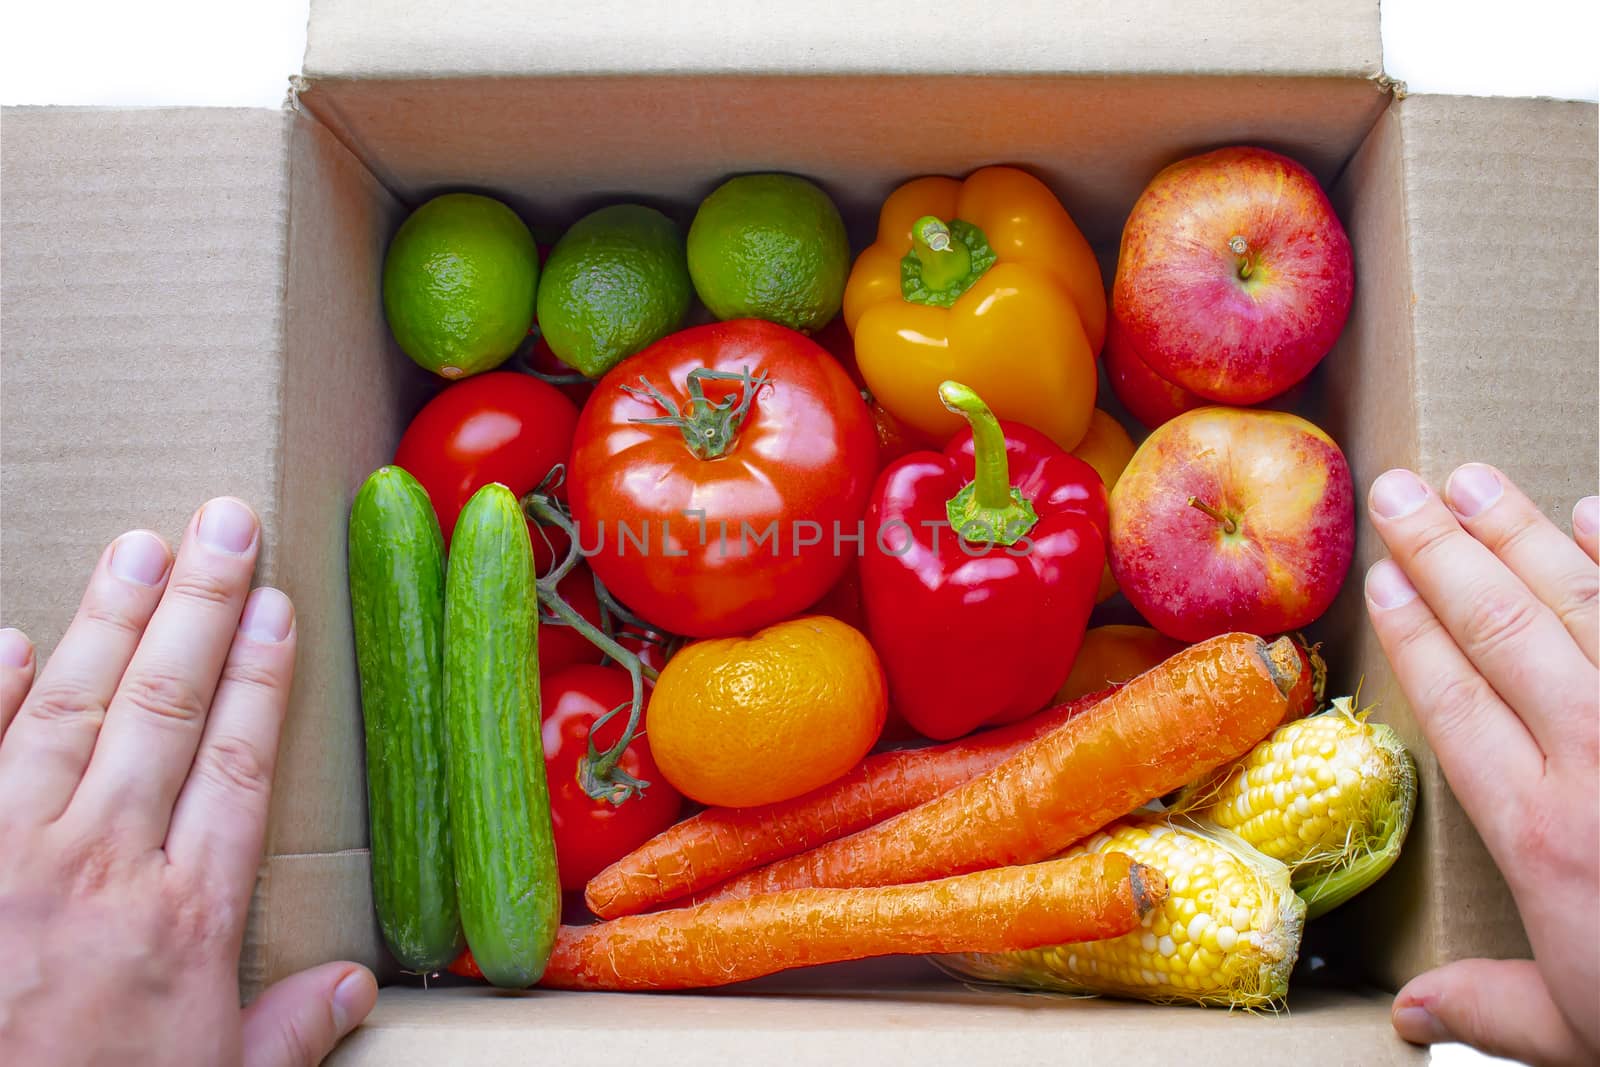 A person opening a deliver cardboard box with produce, fruits and vegetables inside on a white background by oasisamuel